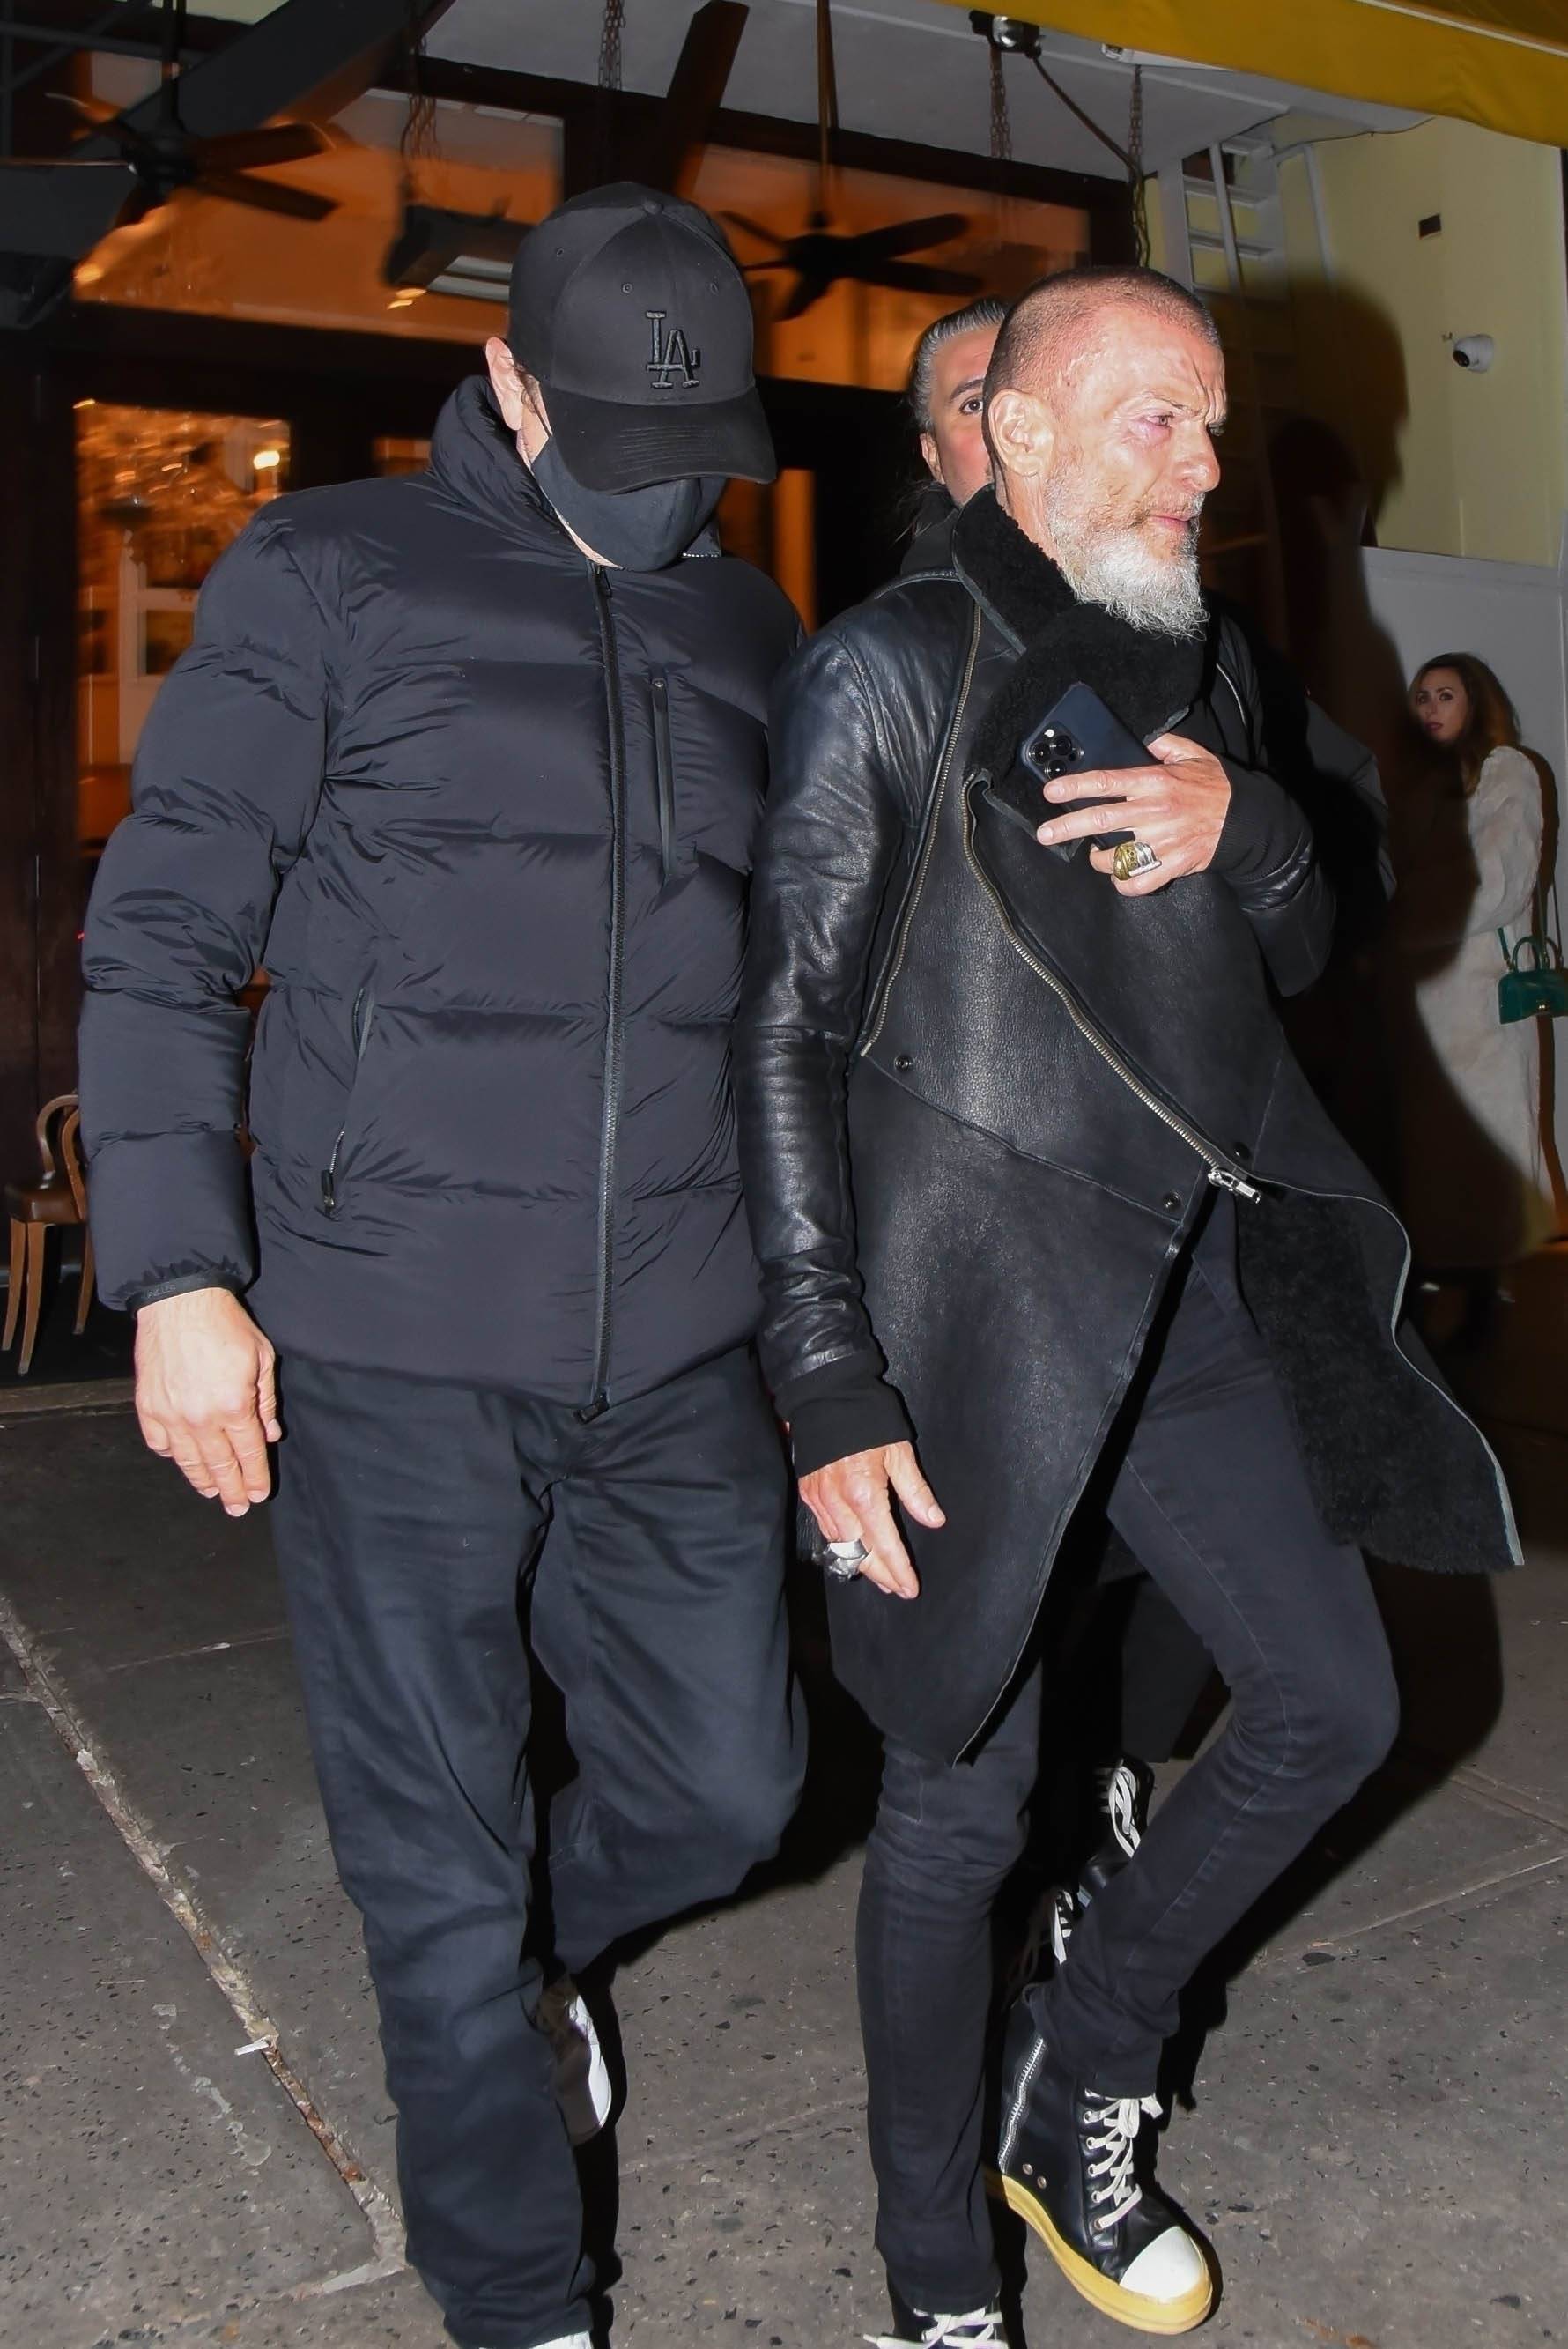 *PREMIUM-EXCLUSIVE* Gigi Hadid and Leonardo DiCaprio's rumored fling has turned into a full-blown romance as they grab dinner in NYC!